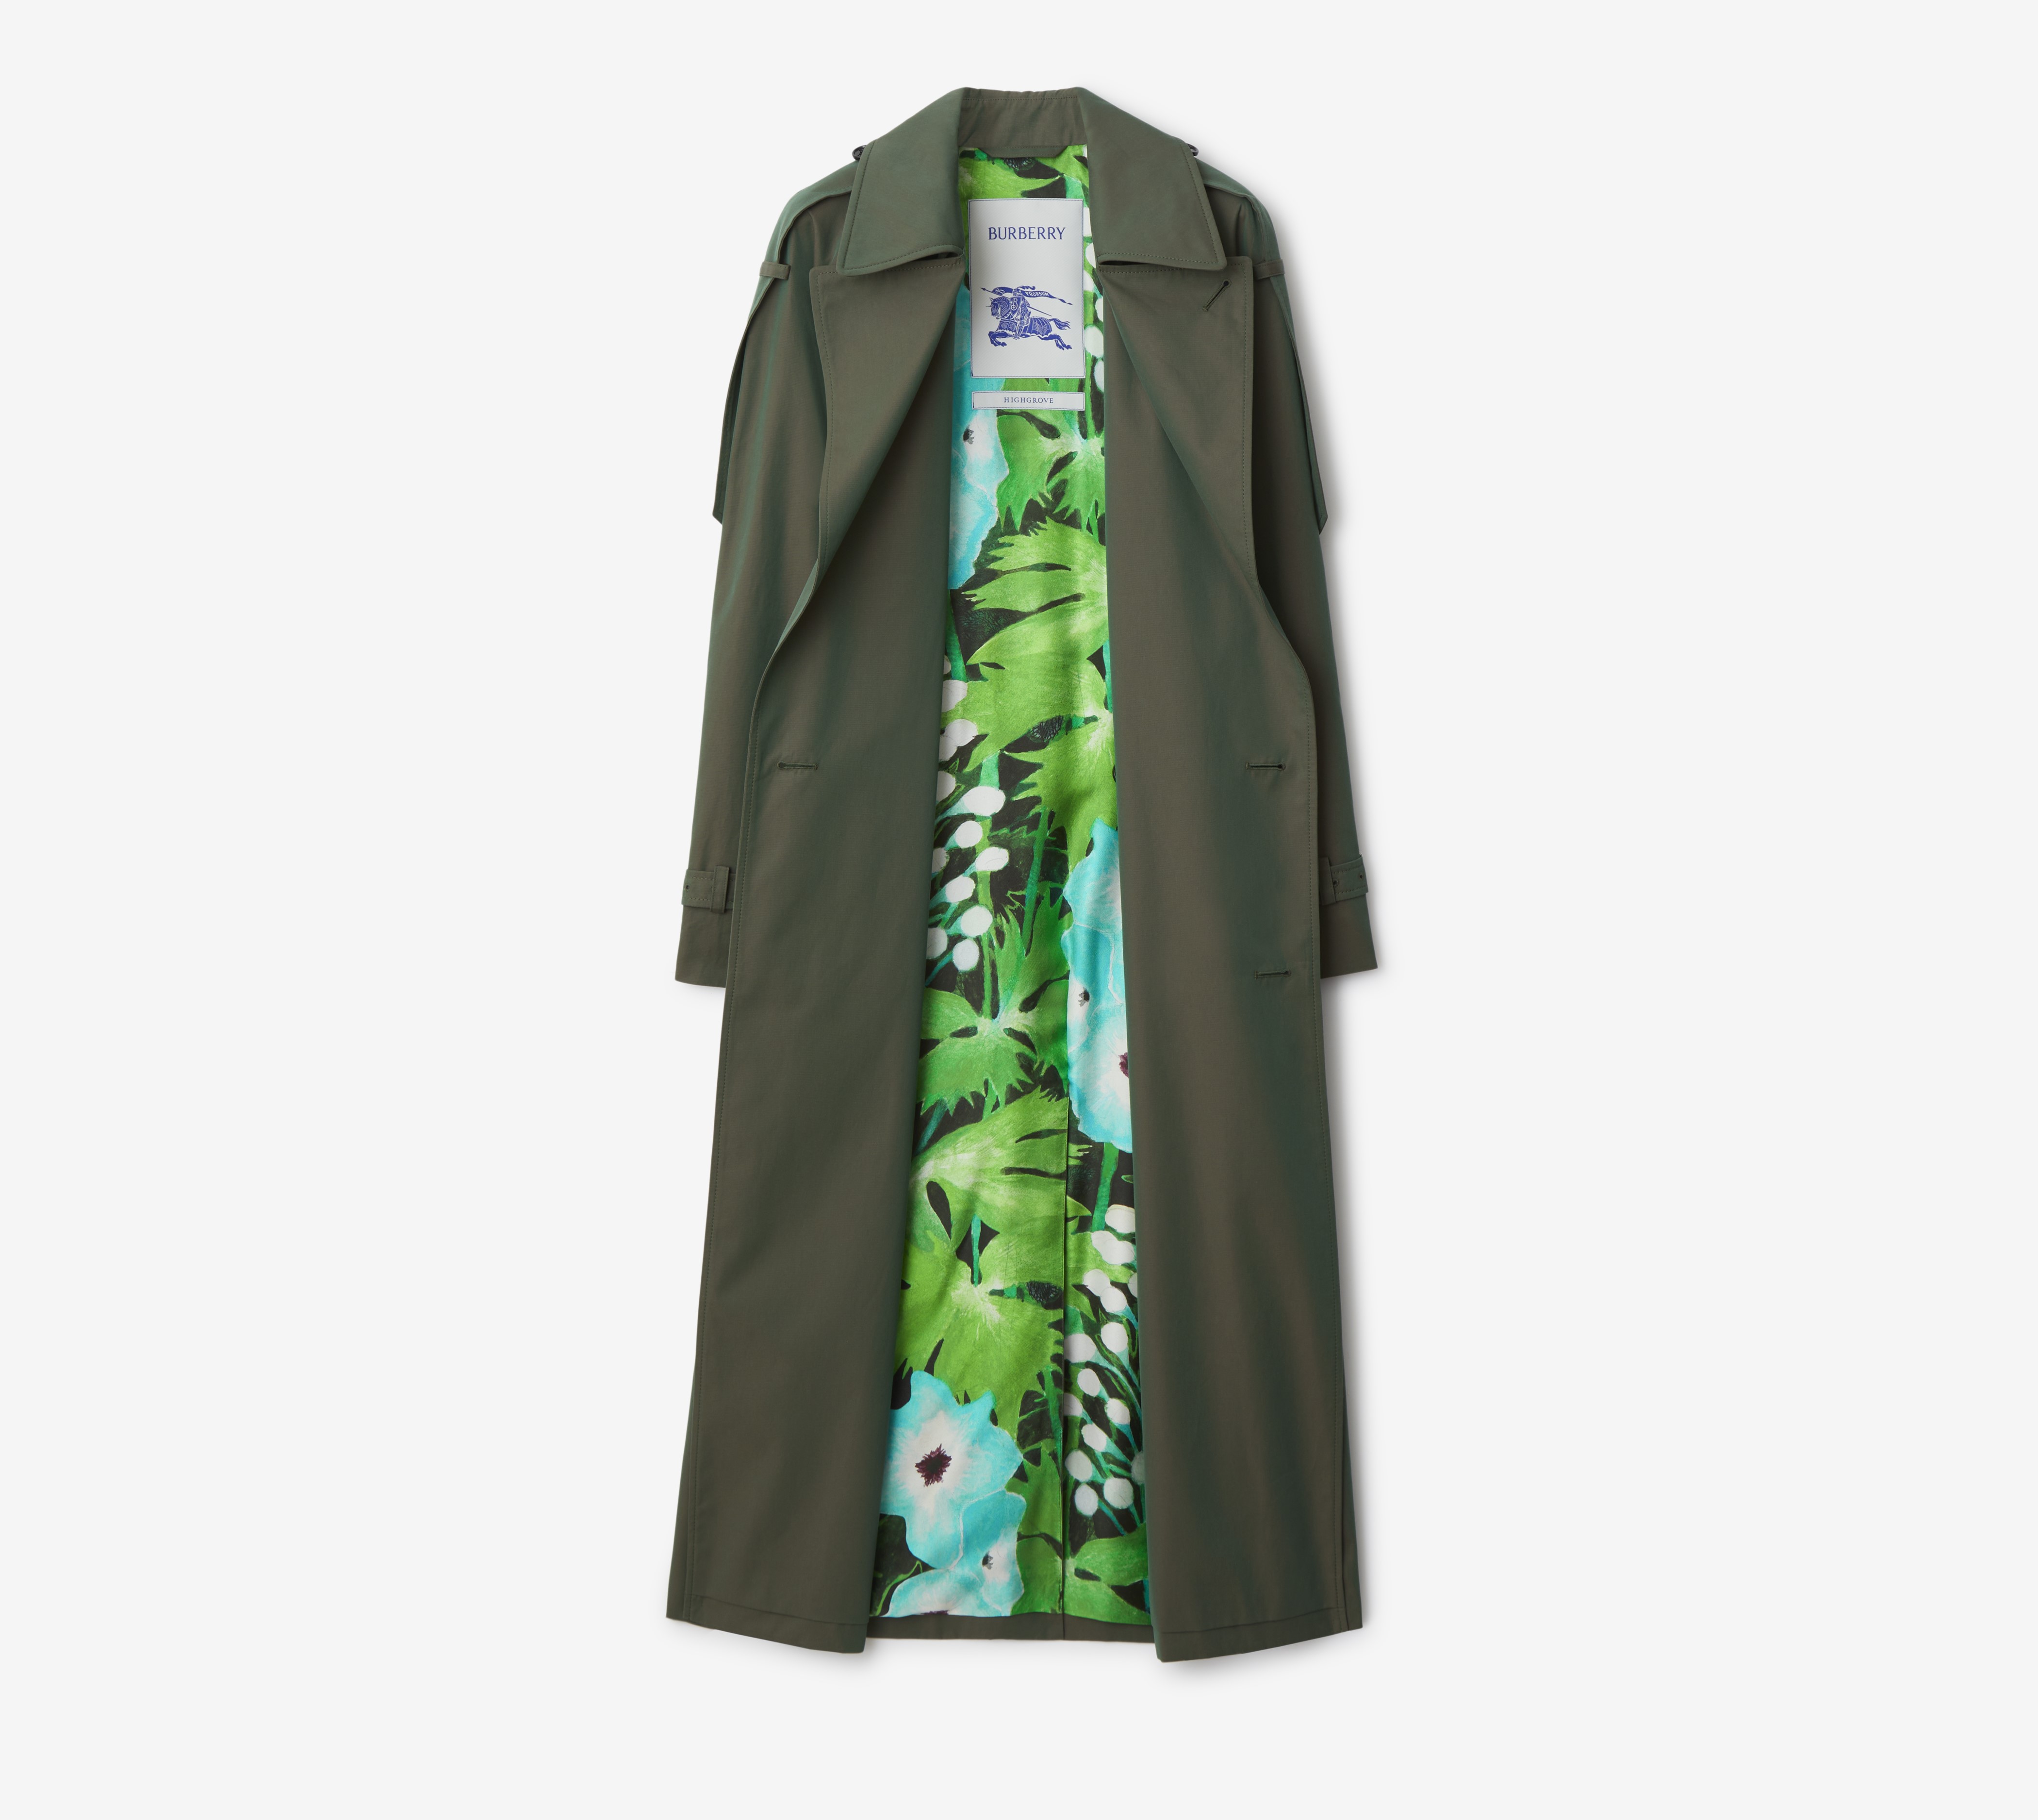 The Ivy Burberry Trench coat in collaboration with Highgrove featuring the King's favourite flower 